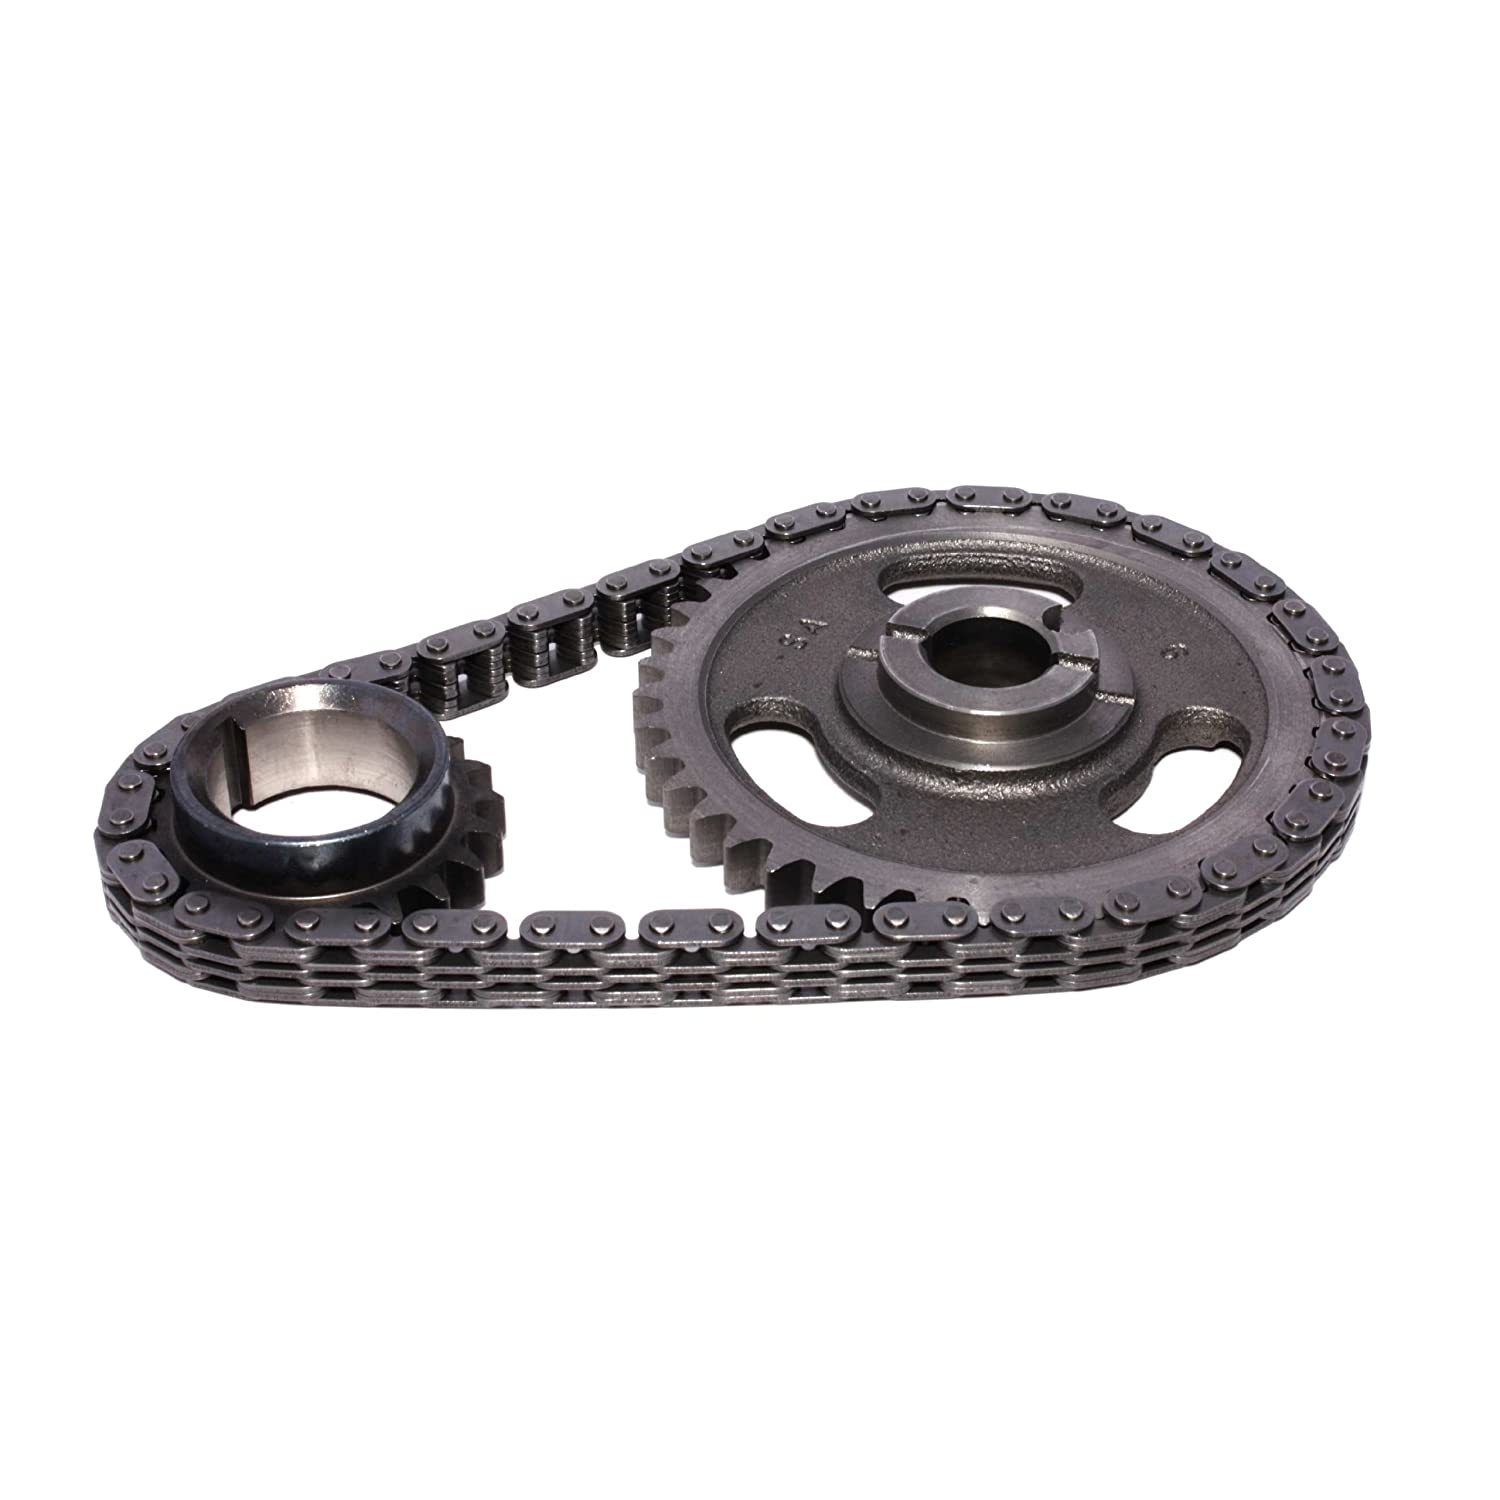 Comp Cams 3230 High Energy Timing Chain Set For 351 Windsor , 1972 And